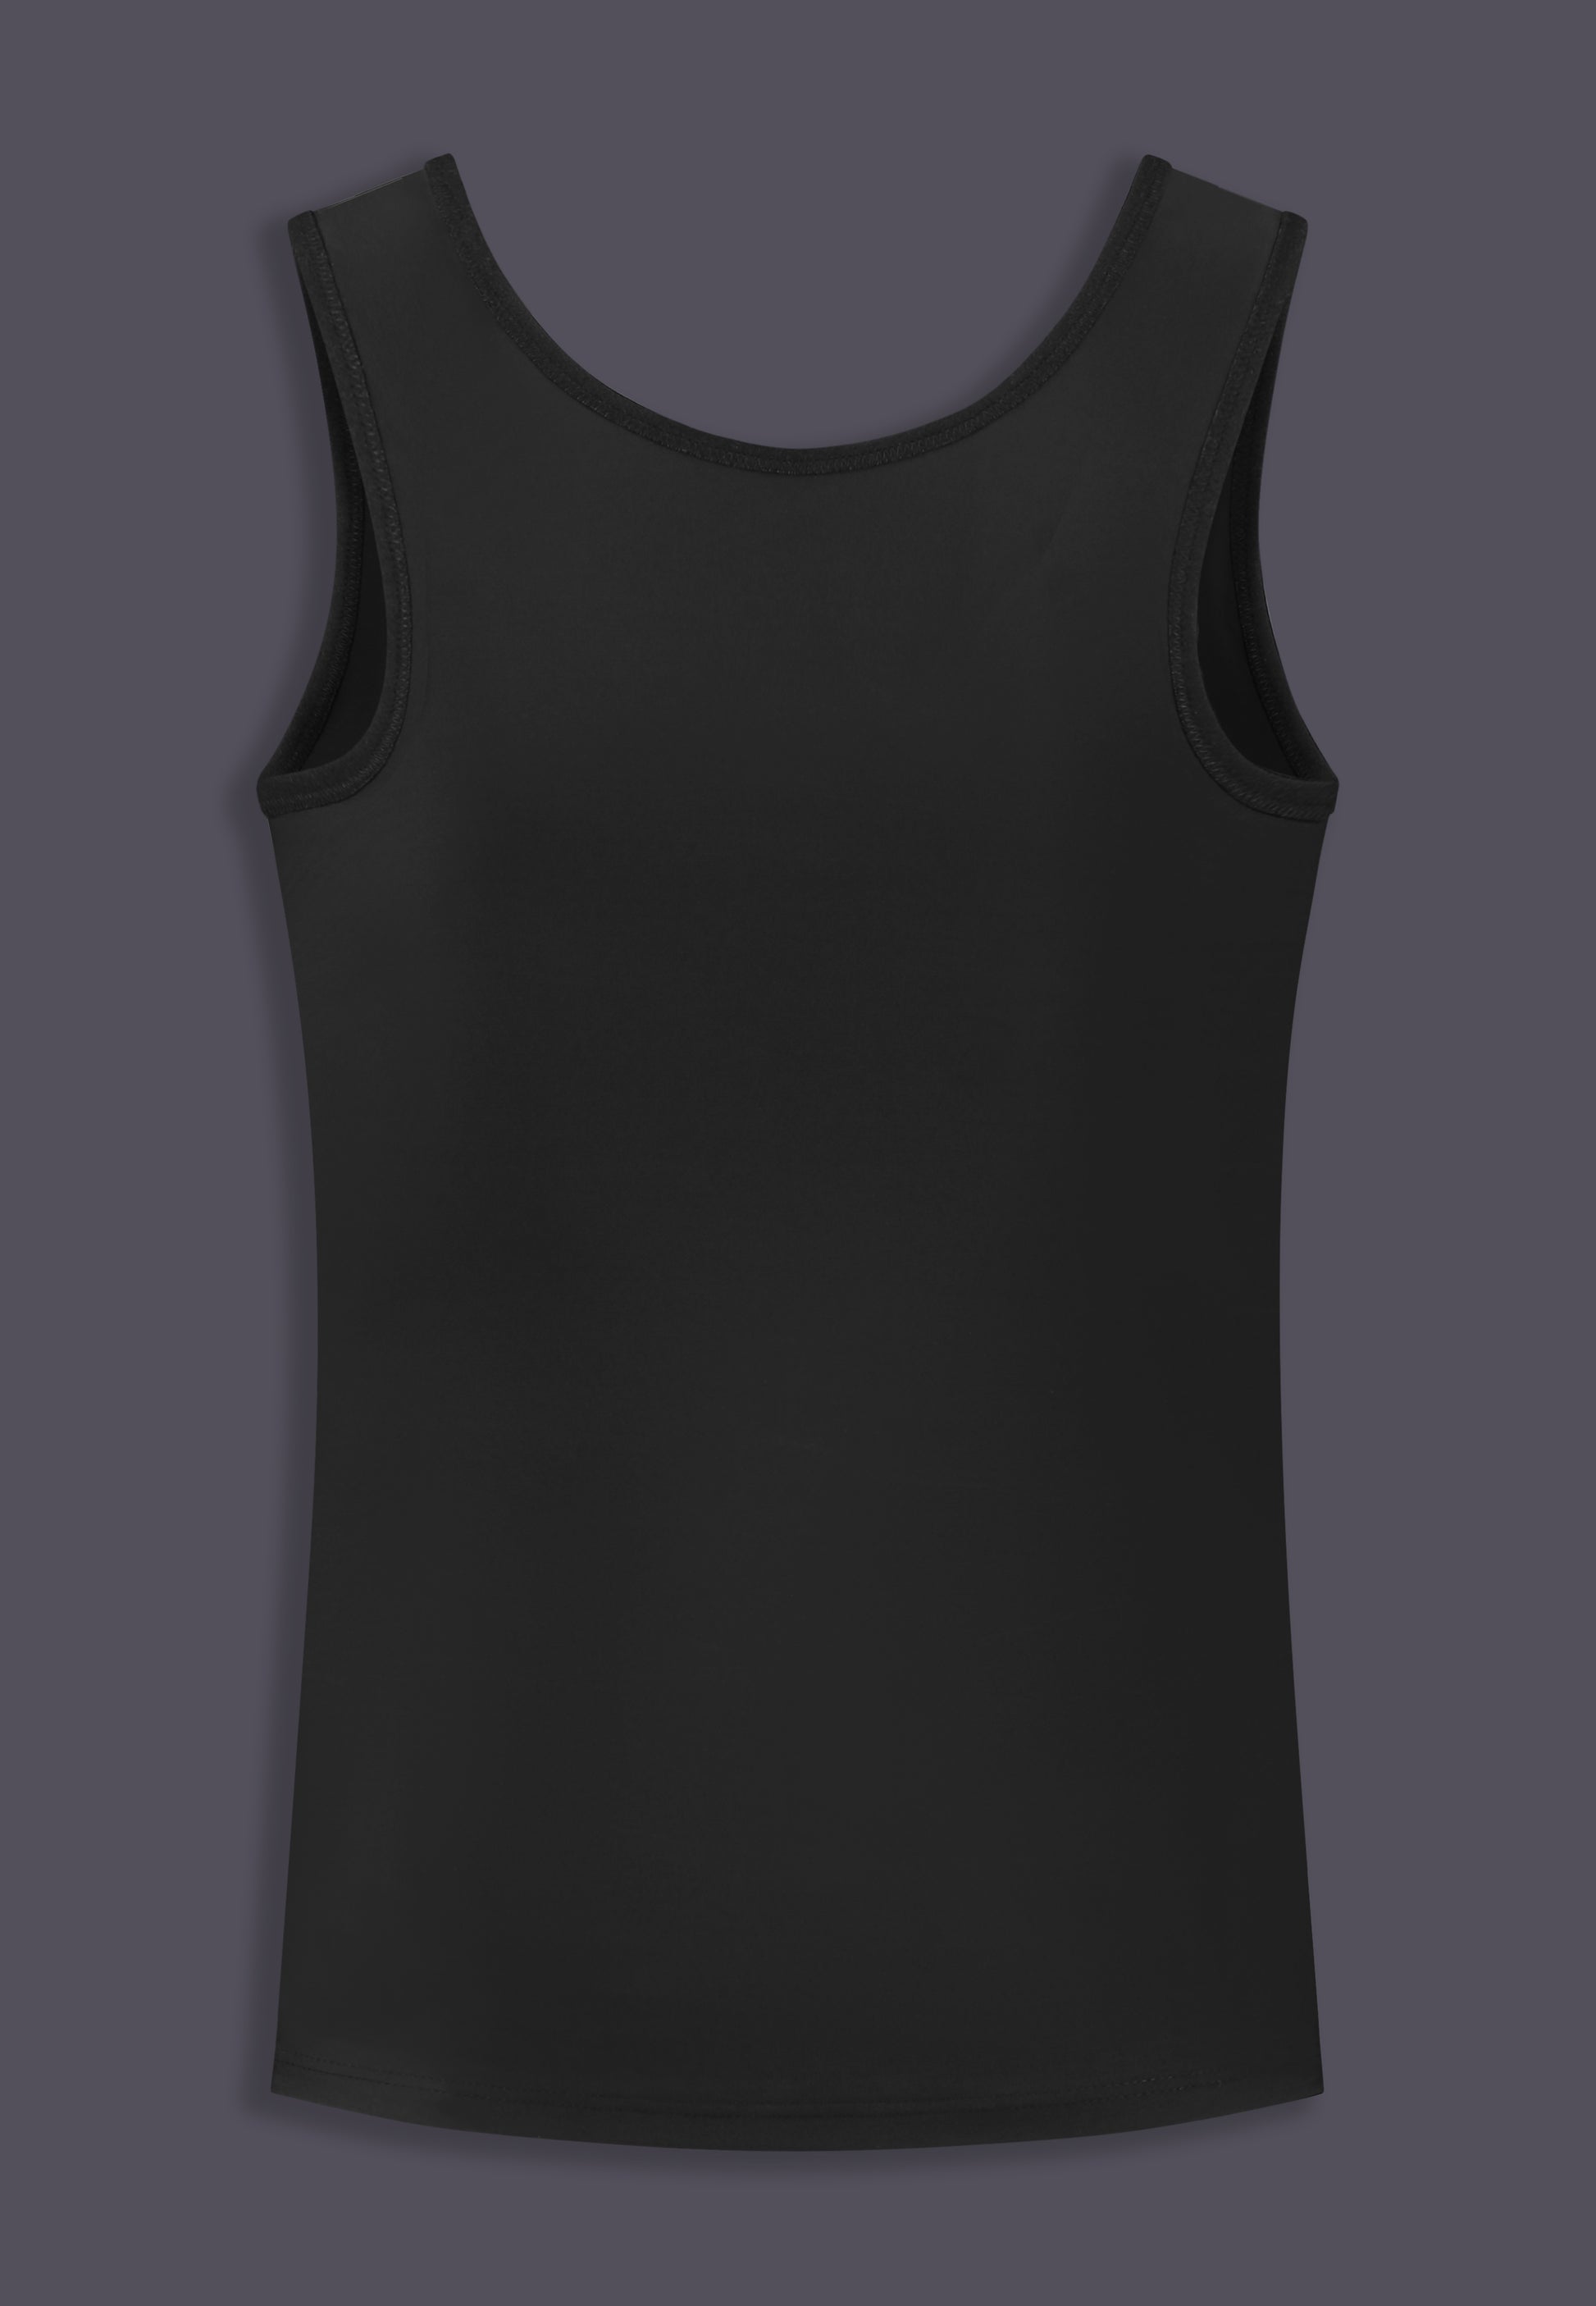 Swim Singlet Advanced black, back view of the item, by UNTAG